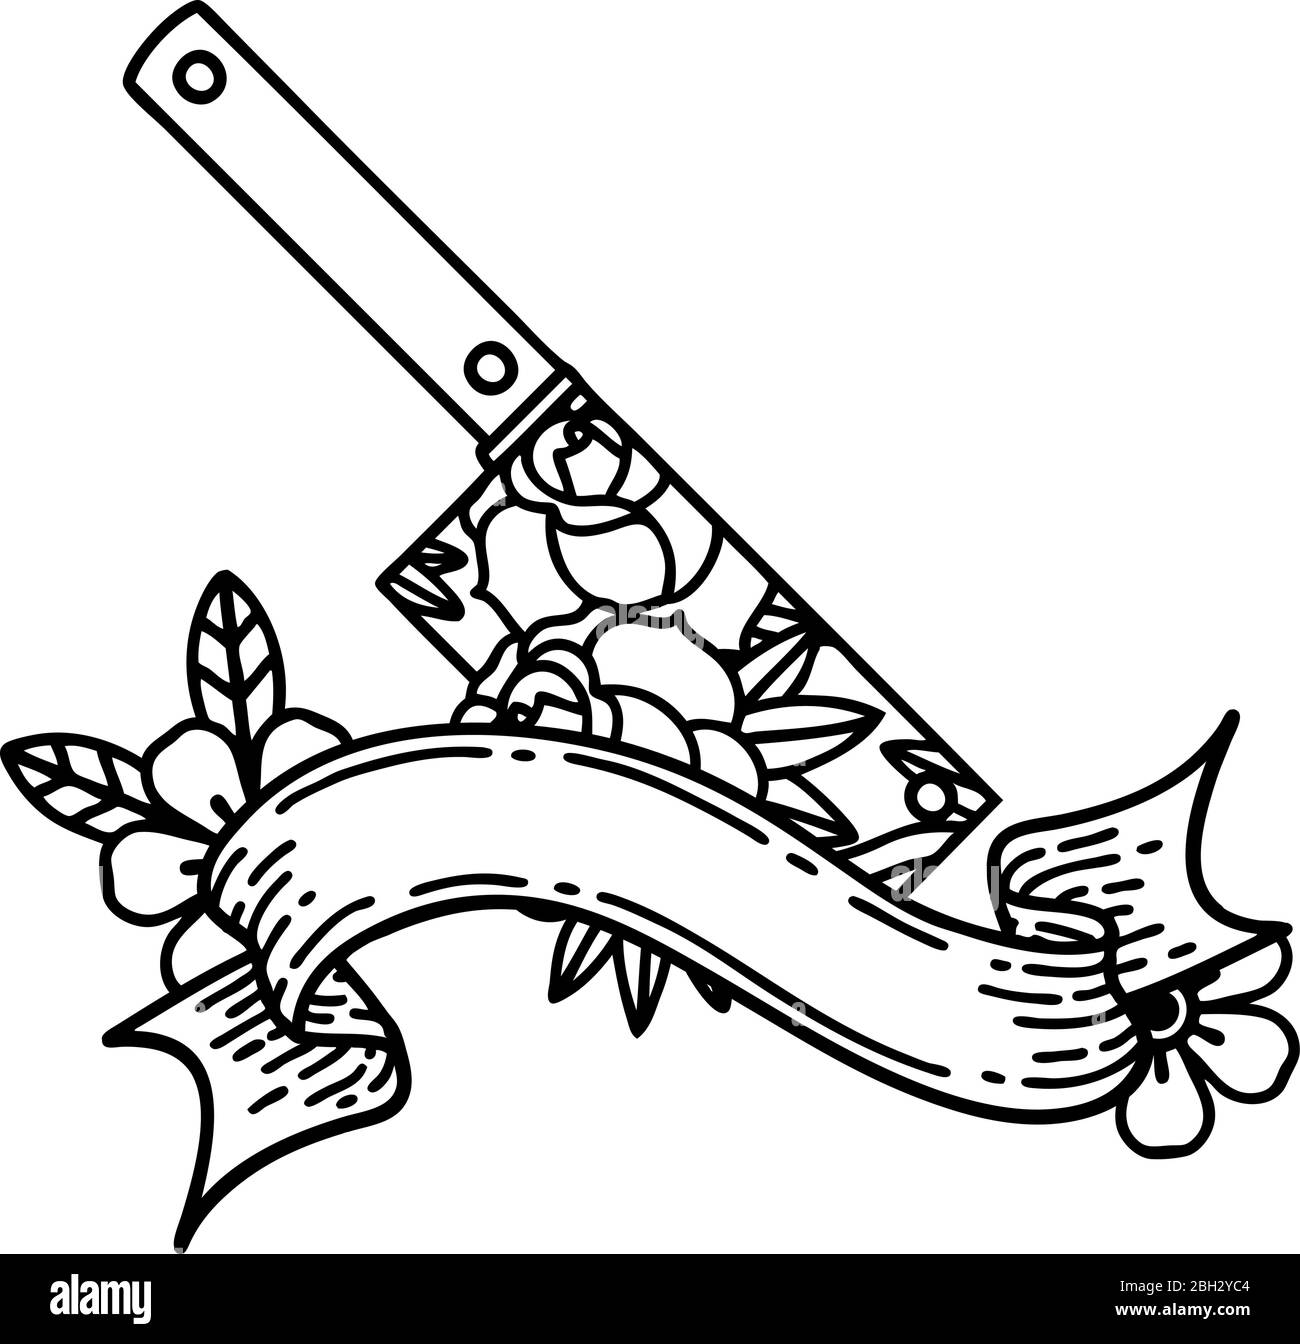 704 Chef Knife Tattoo Images Stock Photos  Vectors  Shutterstock